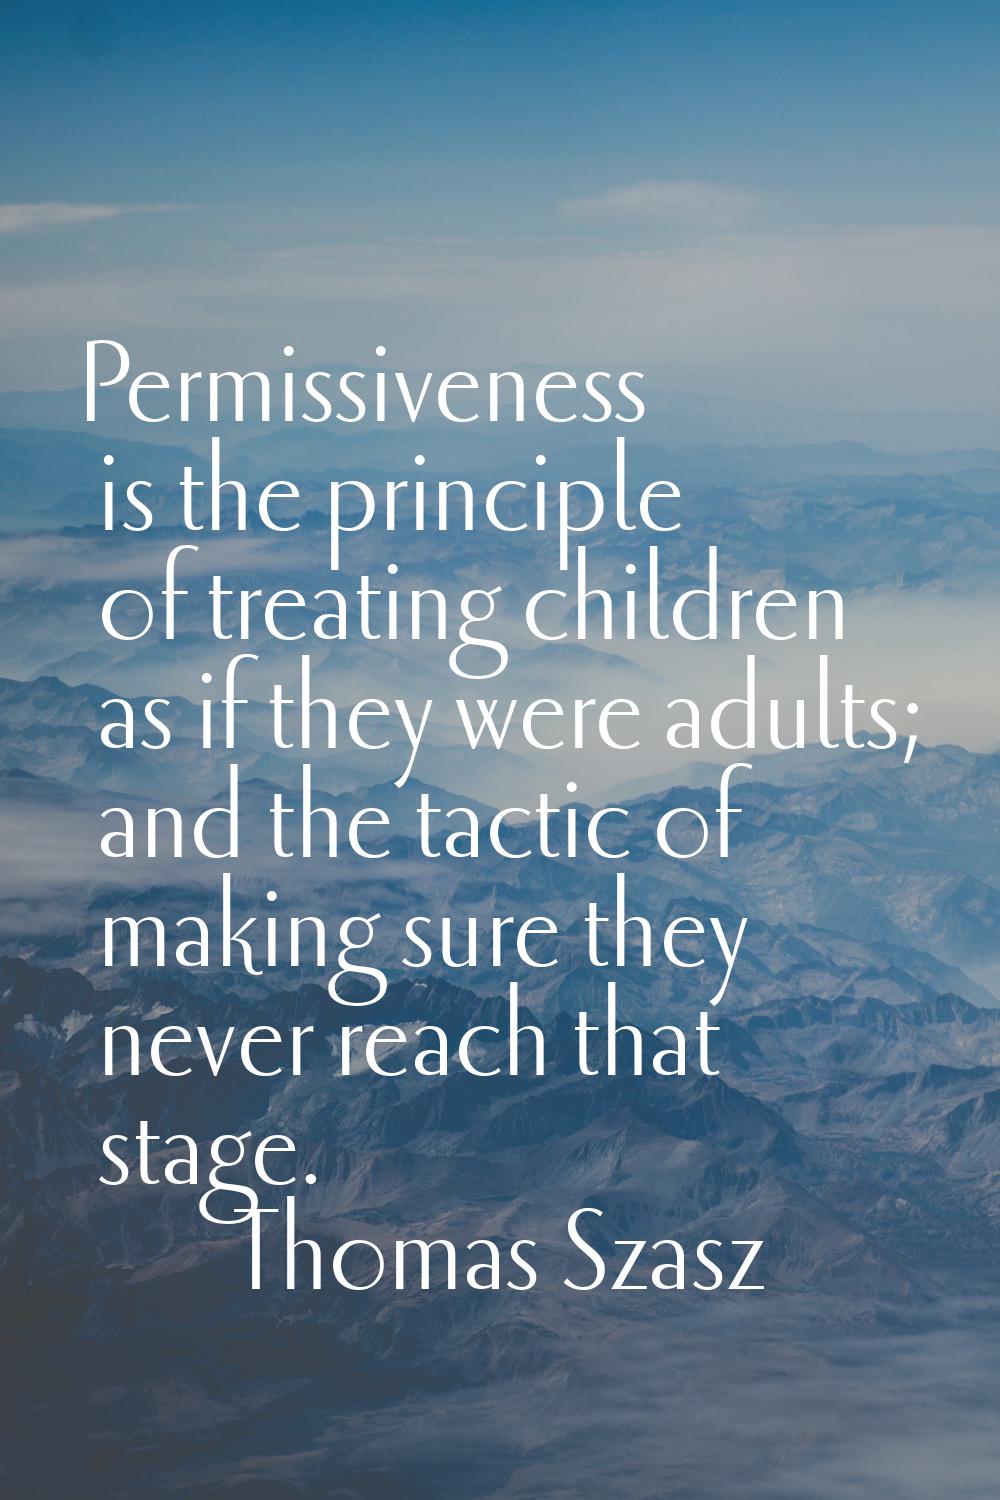 Permissiveness is the principle of treating children as if they were adults; and the tactic of maki